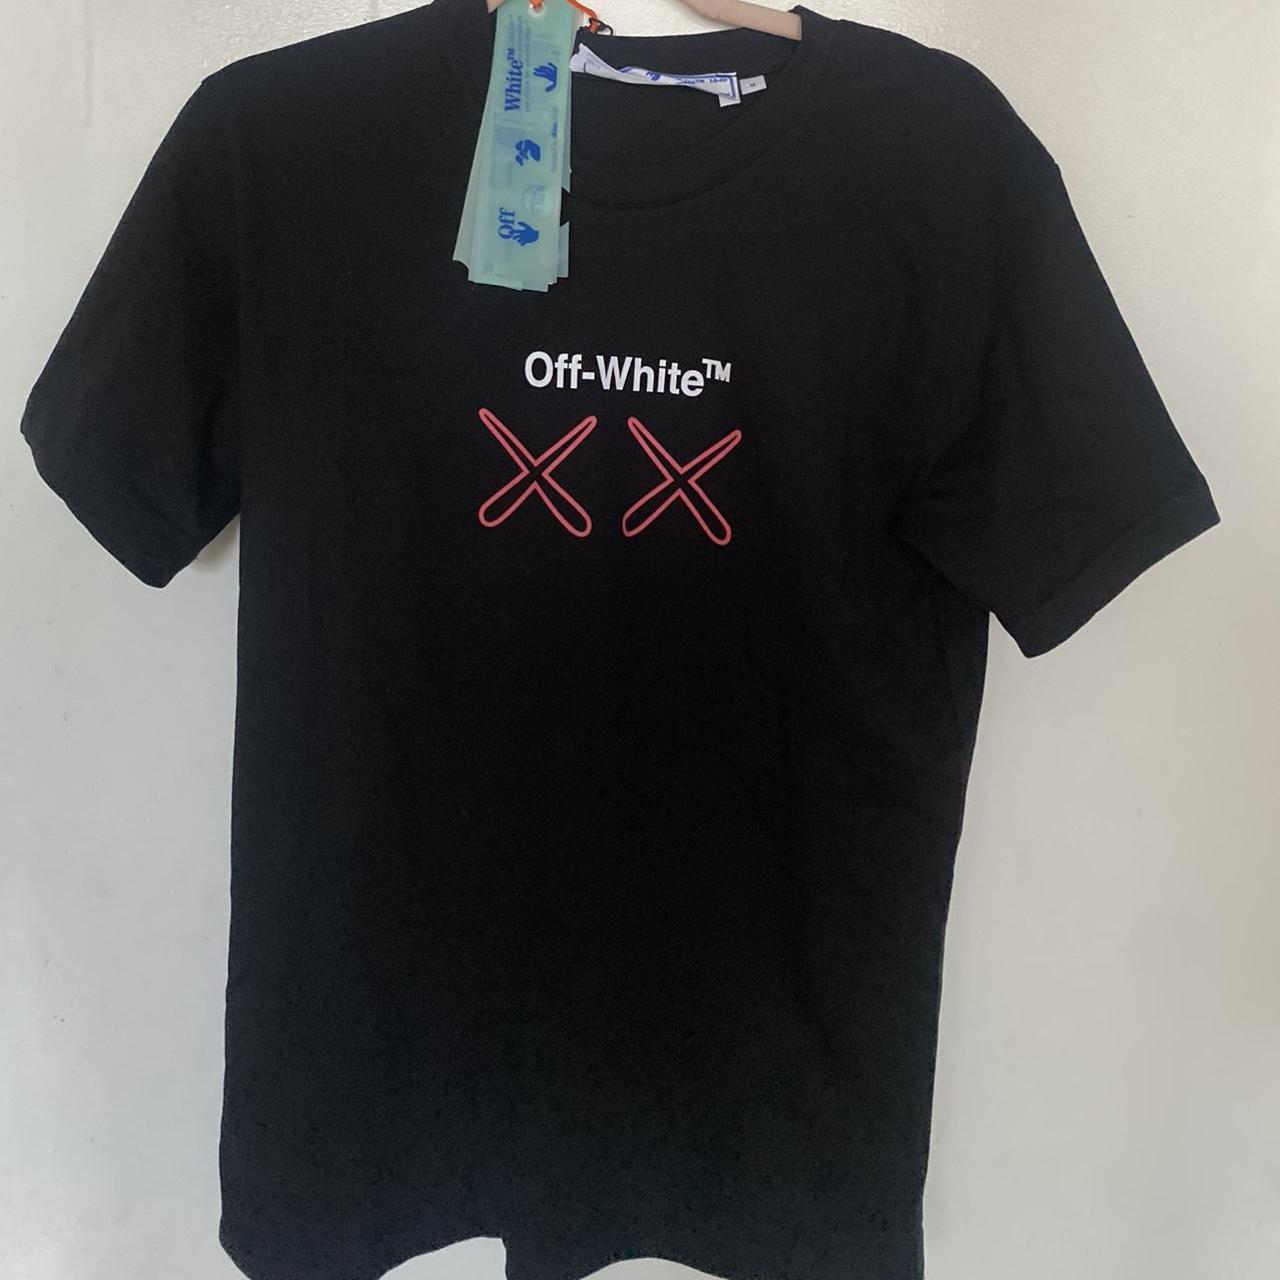 Off-White Men's Black and Red T-shirt